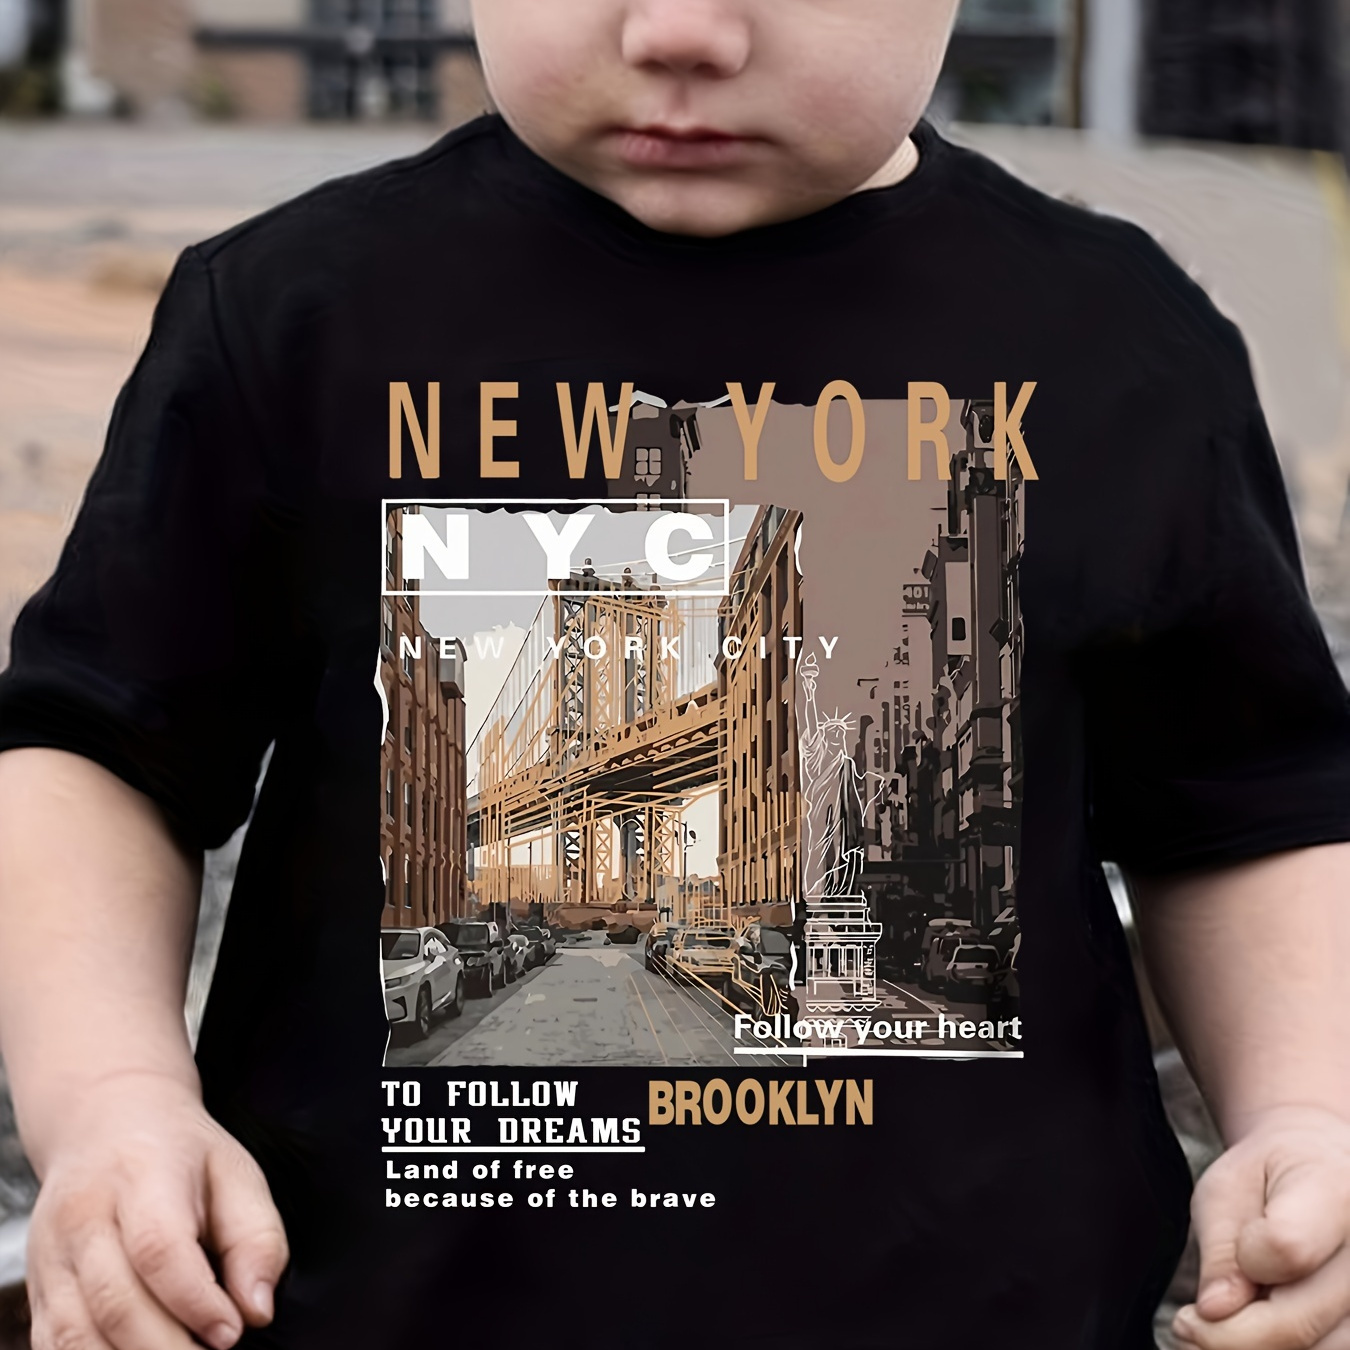 

New York & City View Graphic Print Tee, Boys' Casual & Trendy Crew Neck Short Sleeve Cotton T-shirt For Spring & Summer, Boys' Clothes For Everyday Life